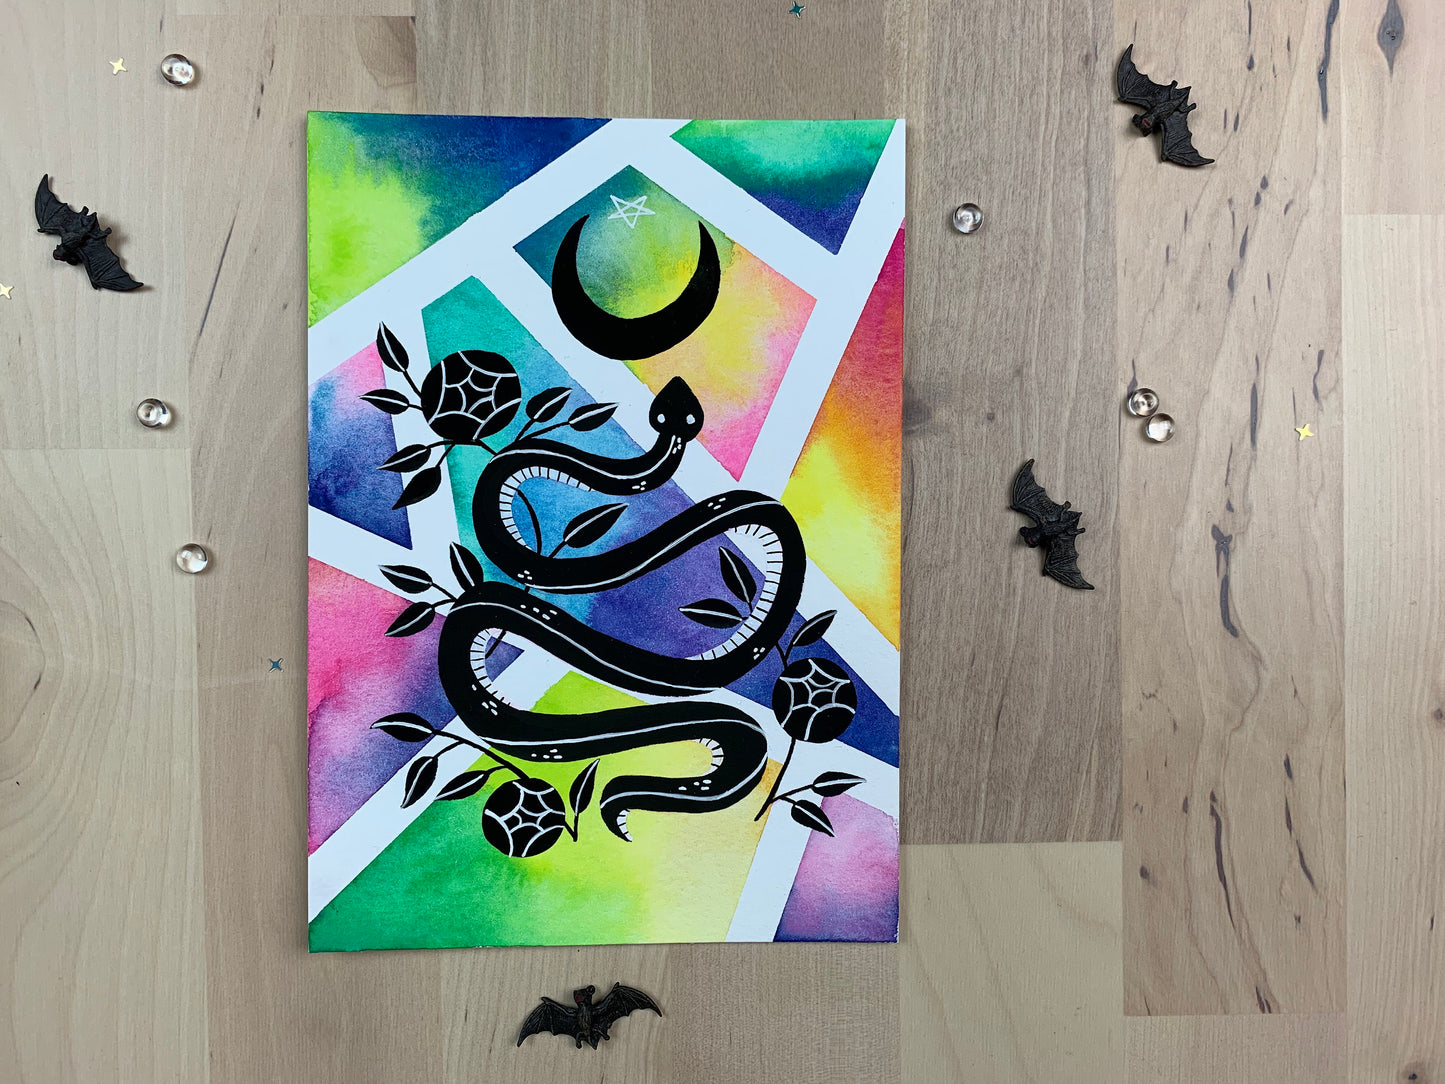 Original artwork depicting a colorful geometric watercolor and gouache painting of a snake with roses and a crescent moon.